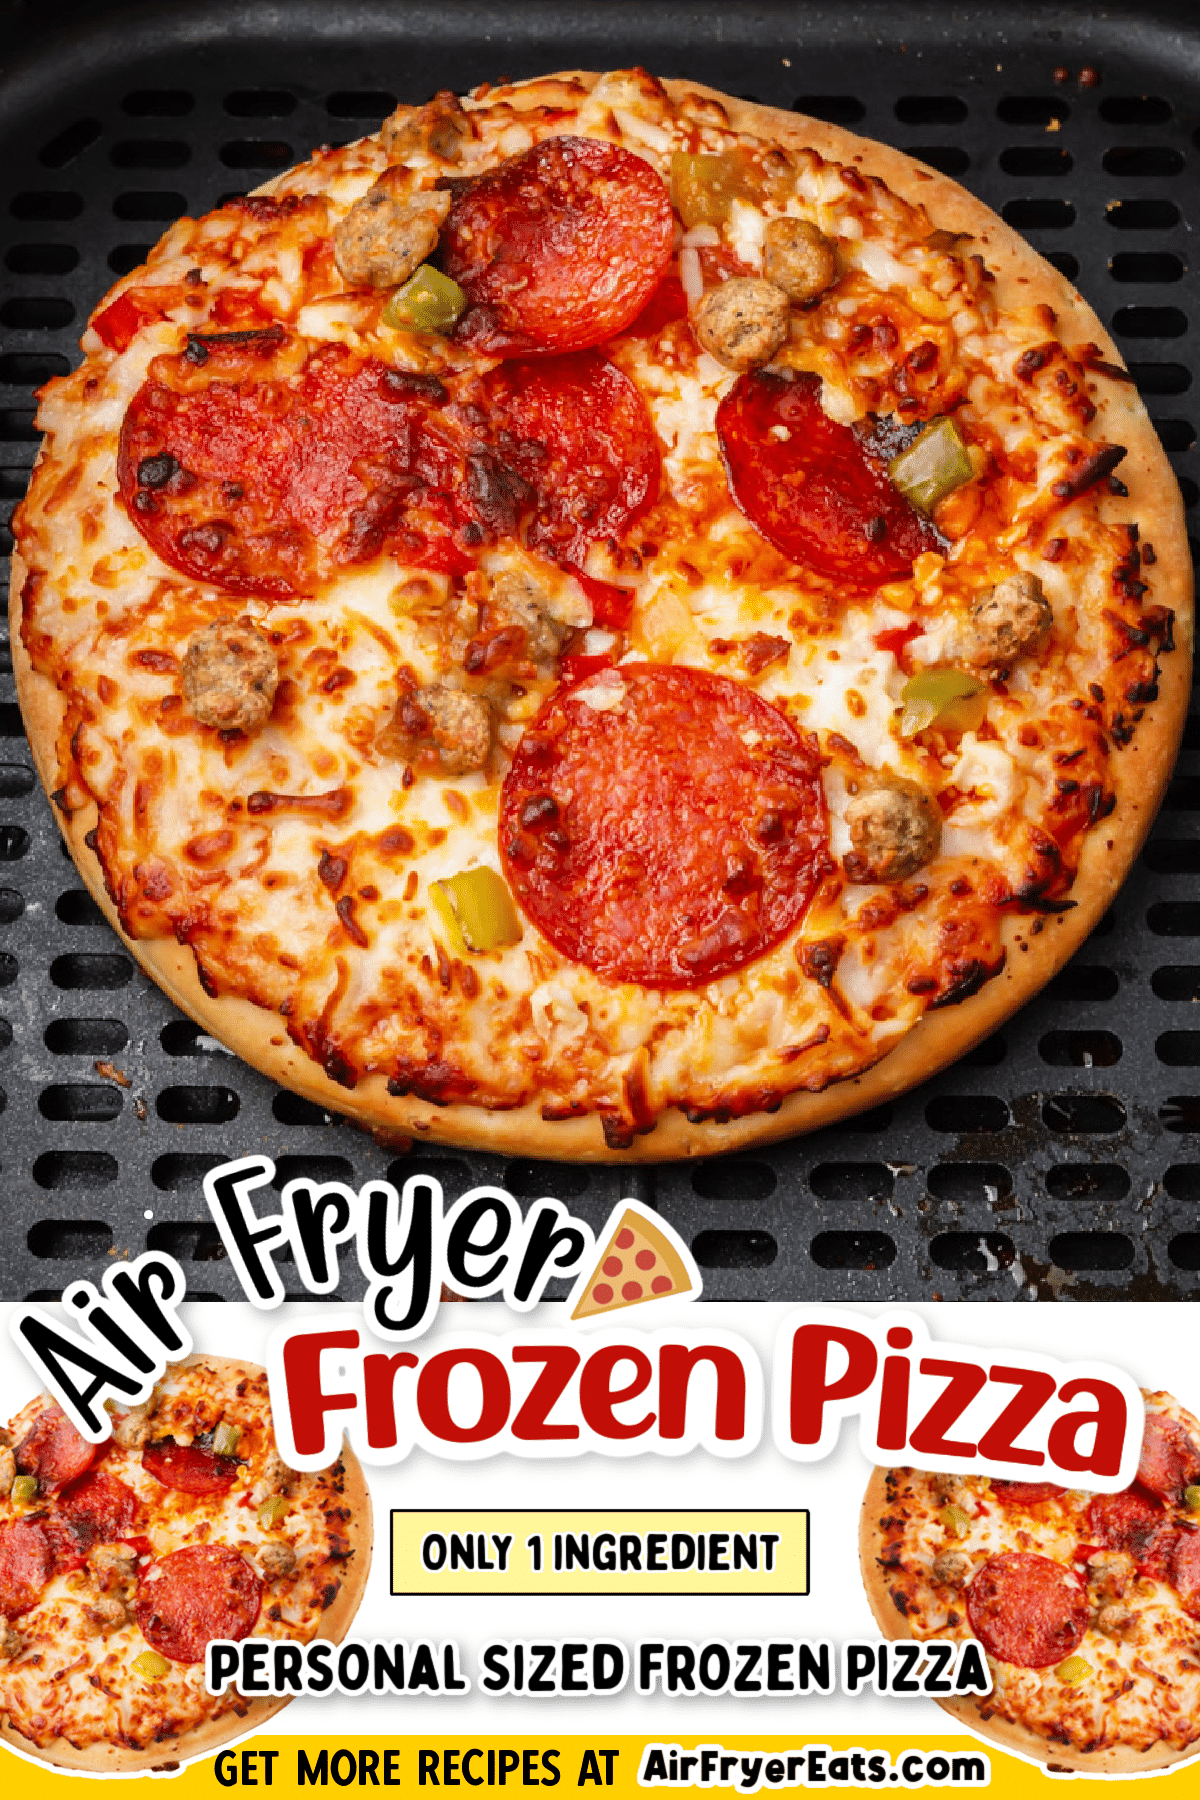 Air Fryer Frozen Pizza is faster and cheaper than take-out! Learn how to make a frozen pizza in your air fryer - it makes the perfect dinner or snack. via @vegetarianmamma